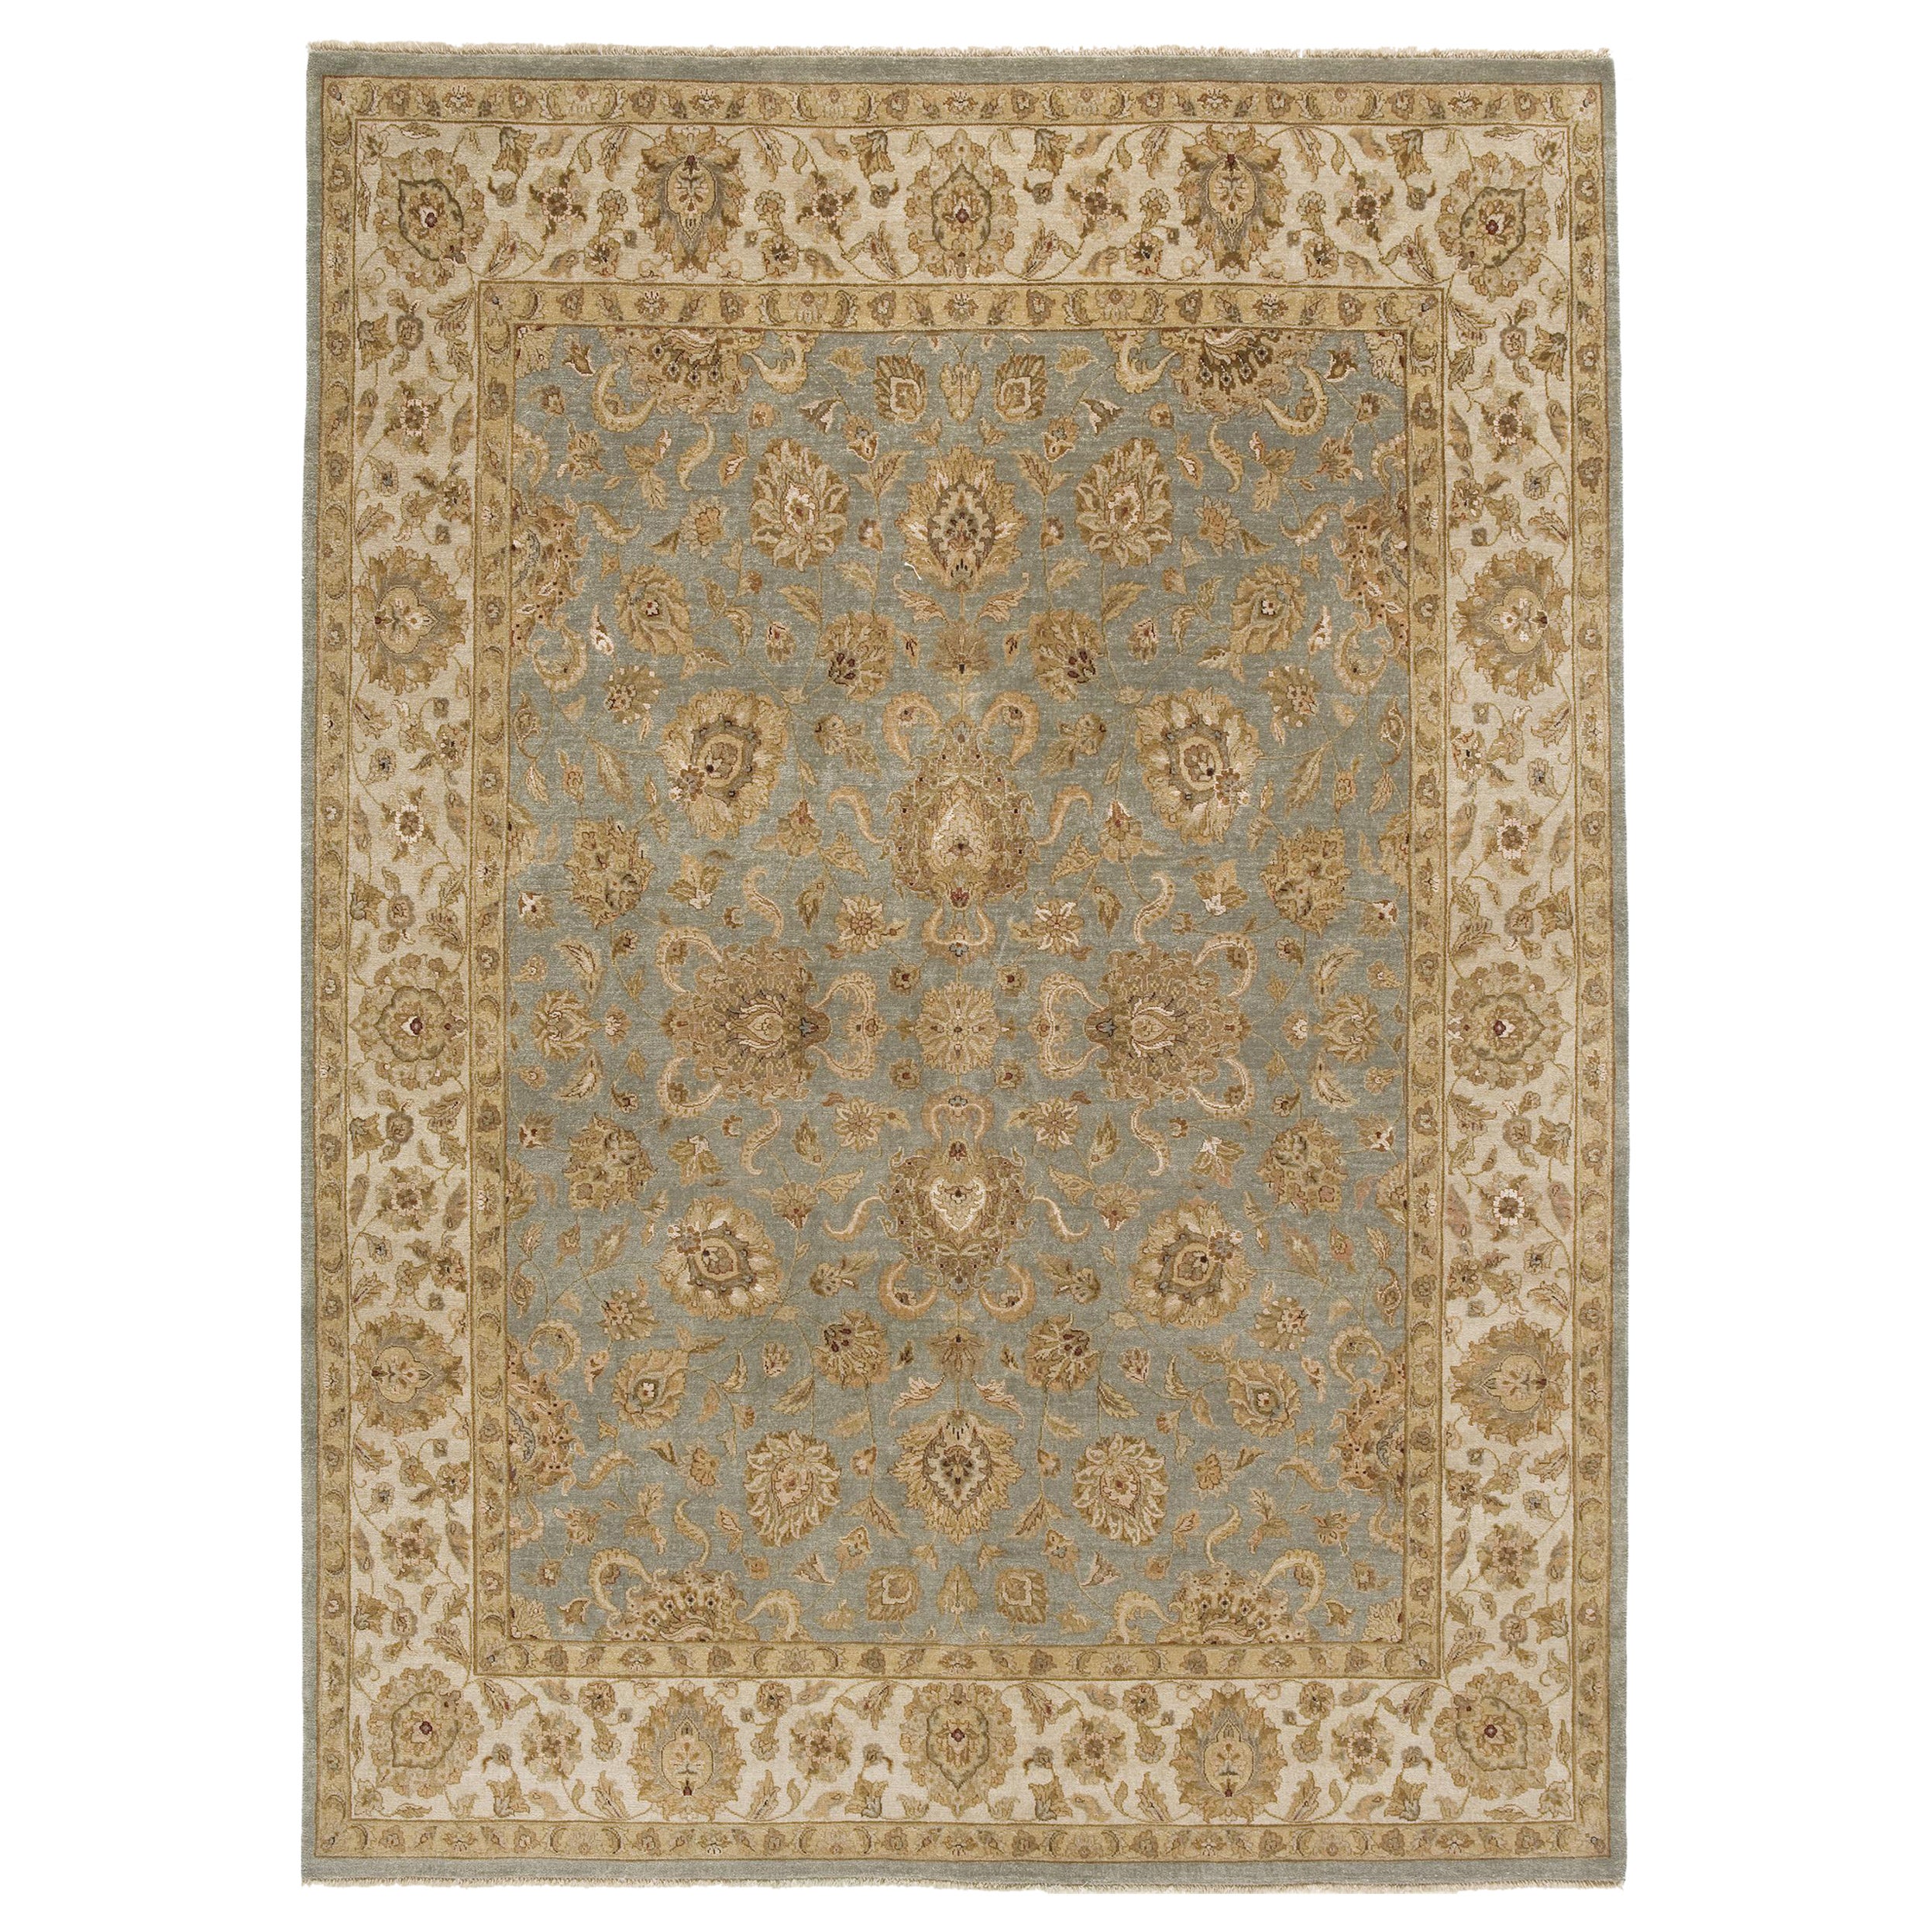 Luxury Traditional Hand-Knotted Kashan Light Blue & Ivory 10x14 Rug